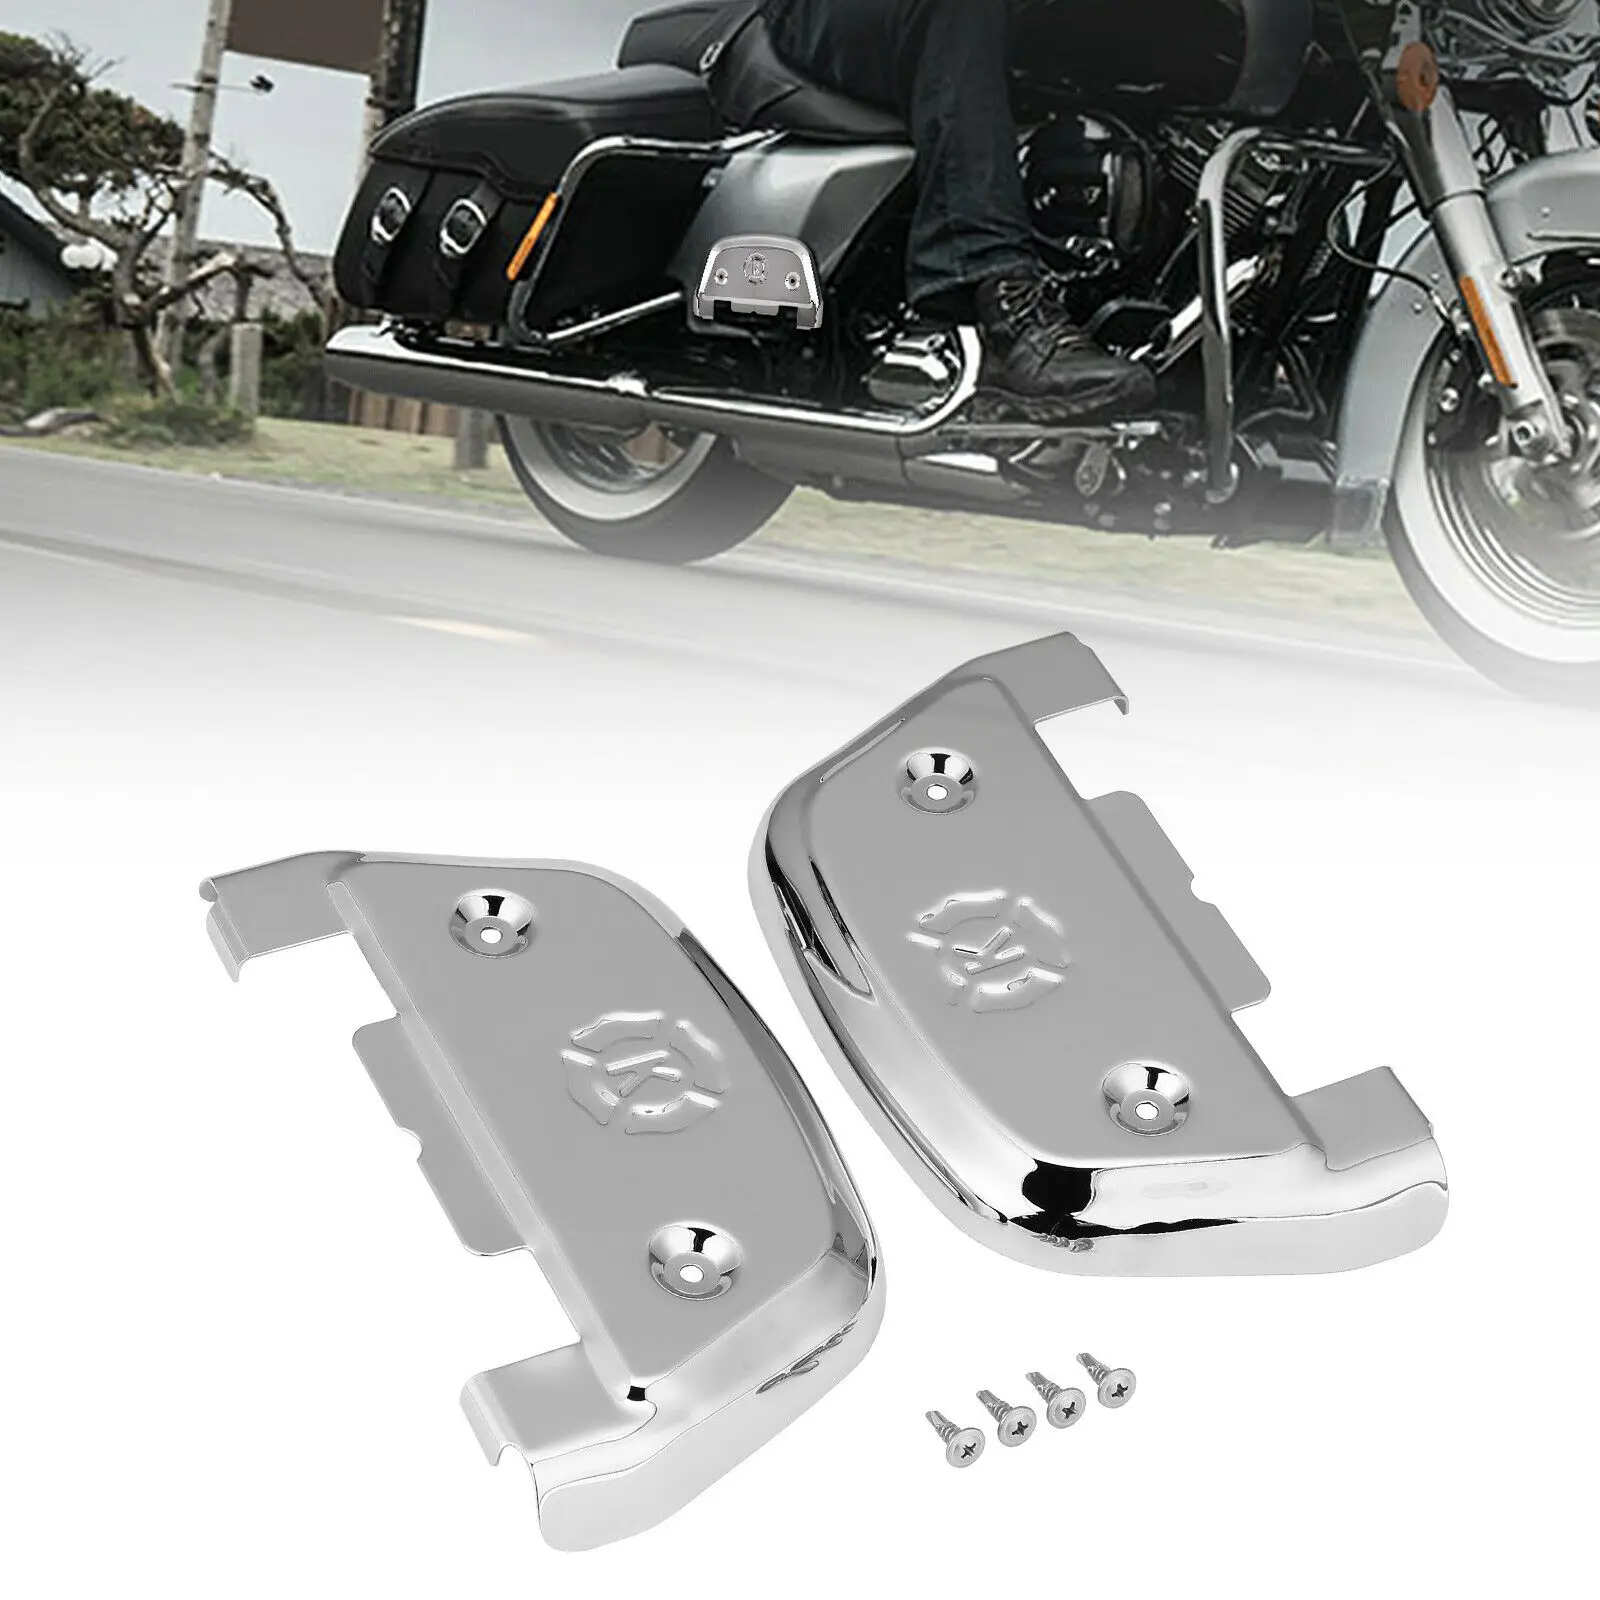 Passenger Footboard Covers D-shaped Floorboard Covers for Electra Glide ... - $43.25